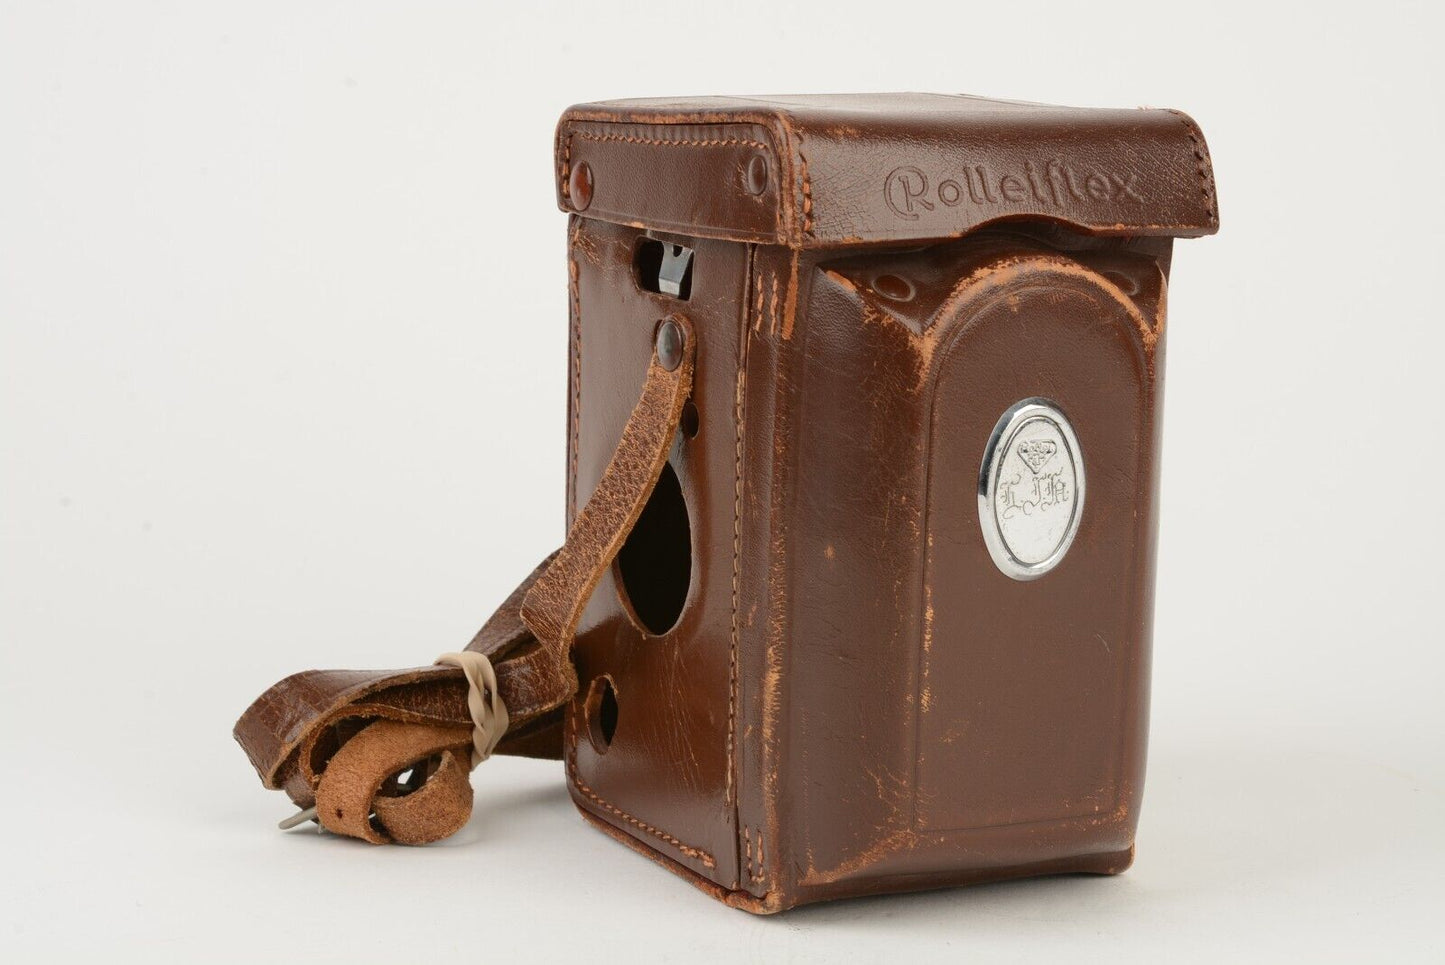 EXC++ ROLLEIFLEX 2.8D LEATHER EVEREDAY CASE w/STRAP, VERY CLEAN CONDITION